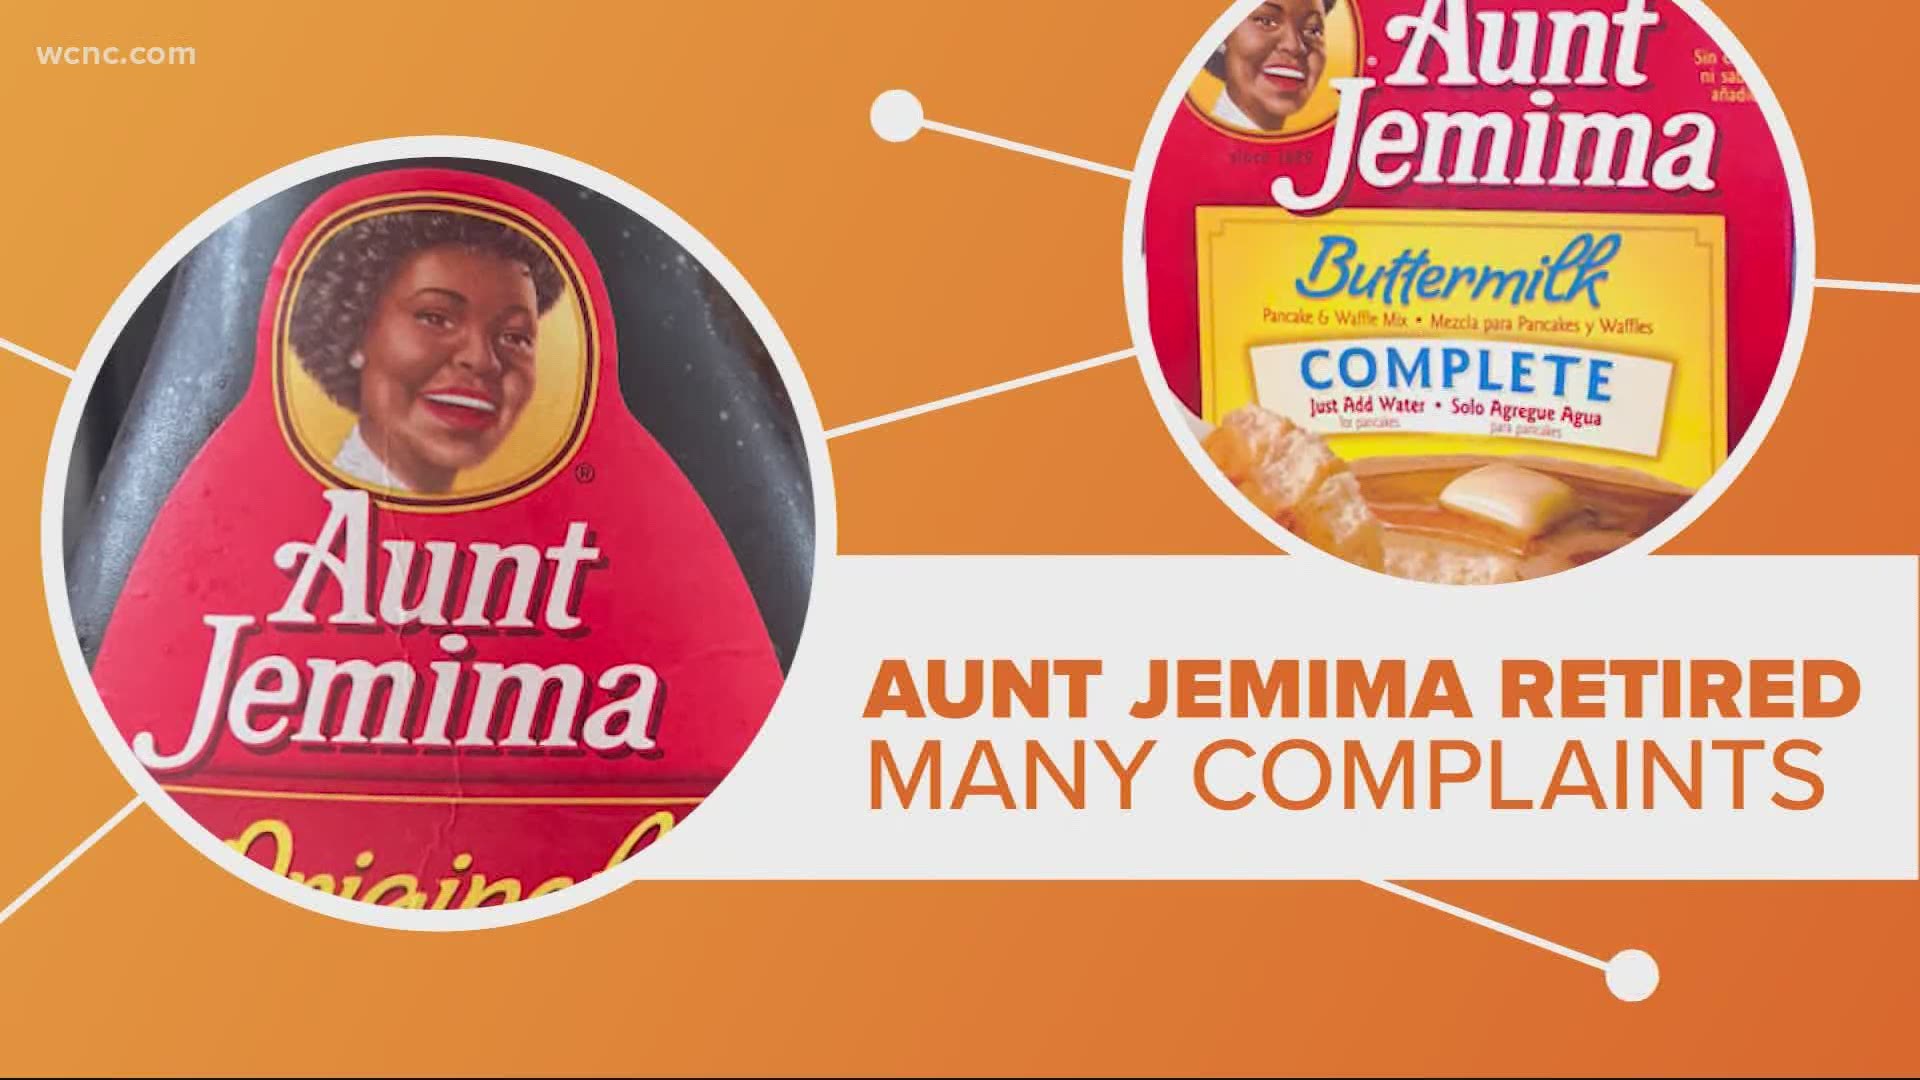 The makers of Aunt Jemima pancake mix and syrup announced they will retire the brand, acknowledging its racist past, which was created more than a century ago.